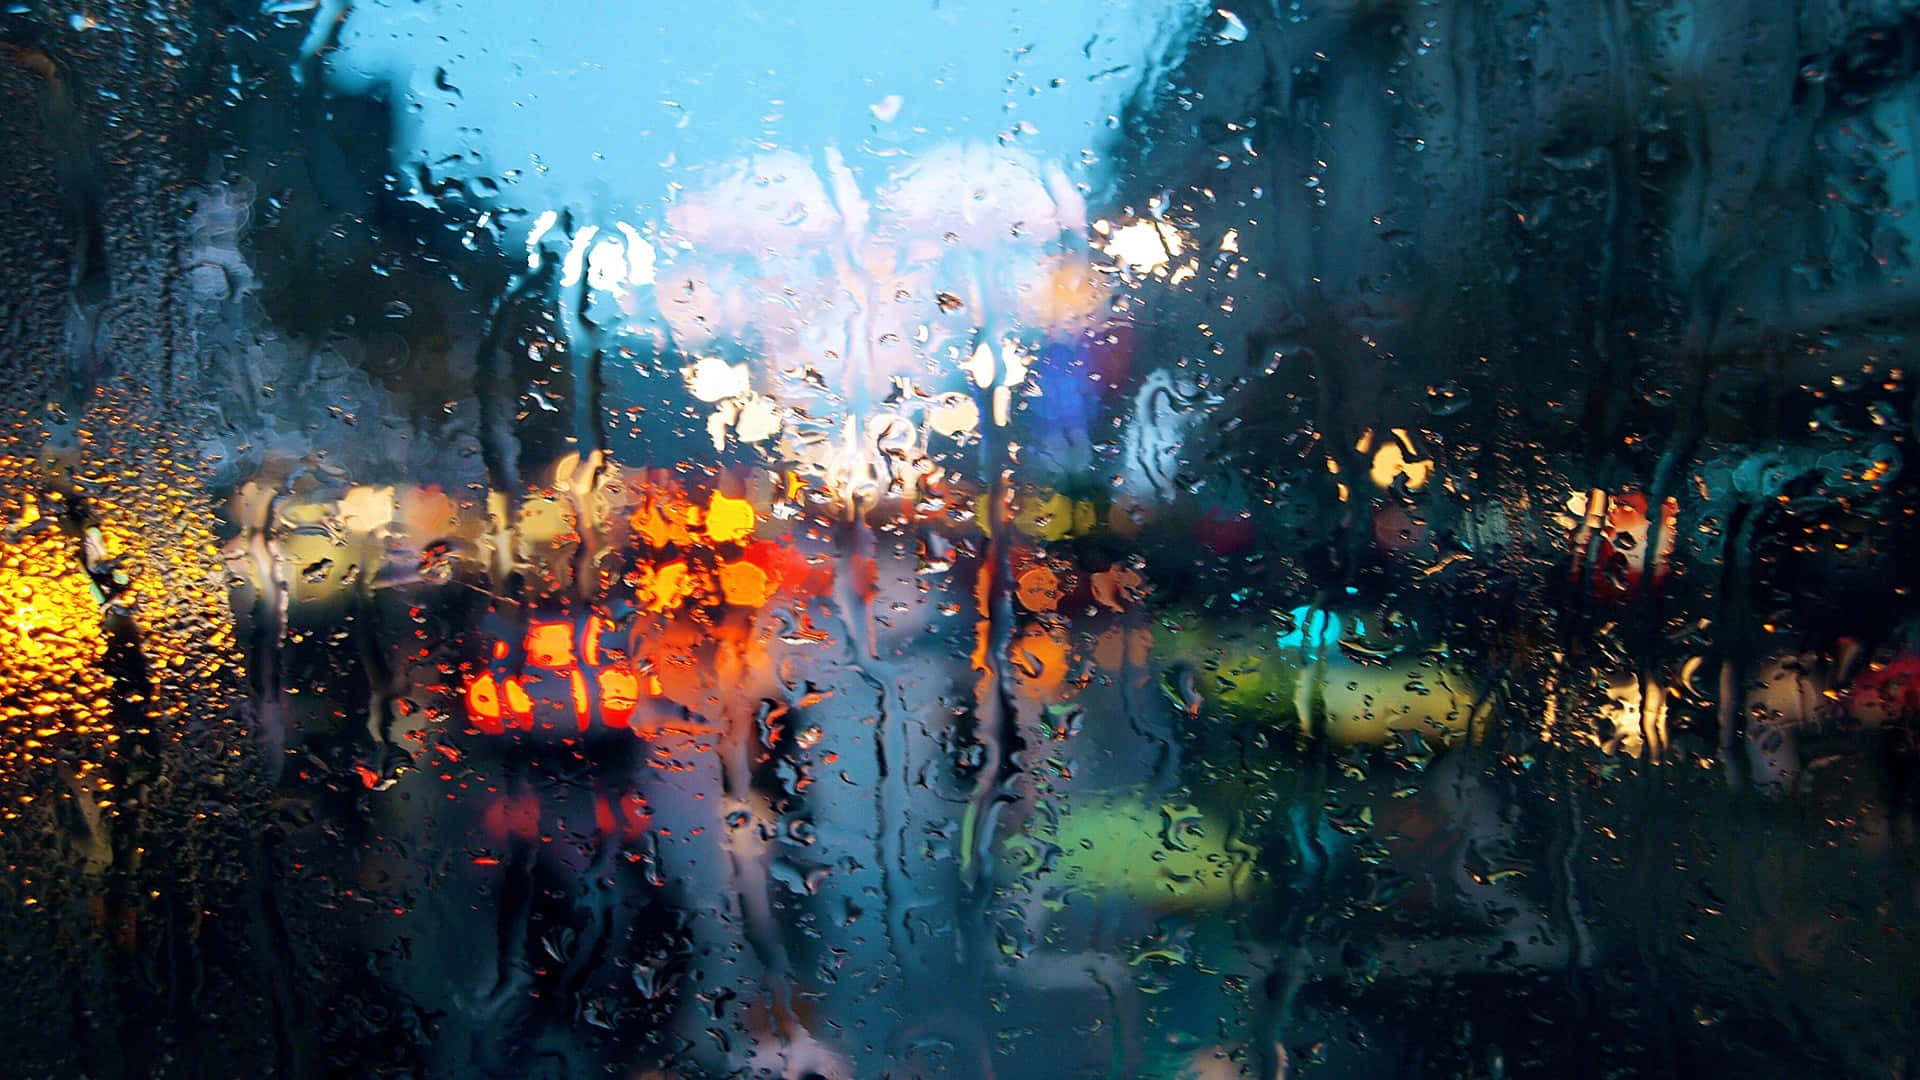 Wet Glass Window On A Rainy Day Picture